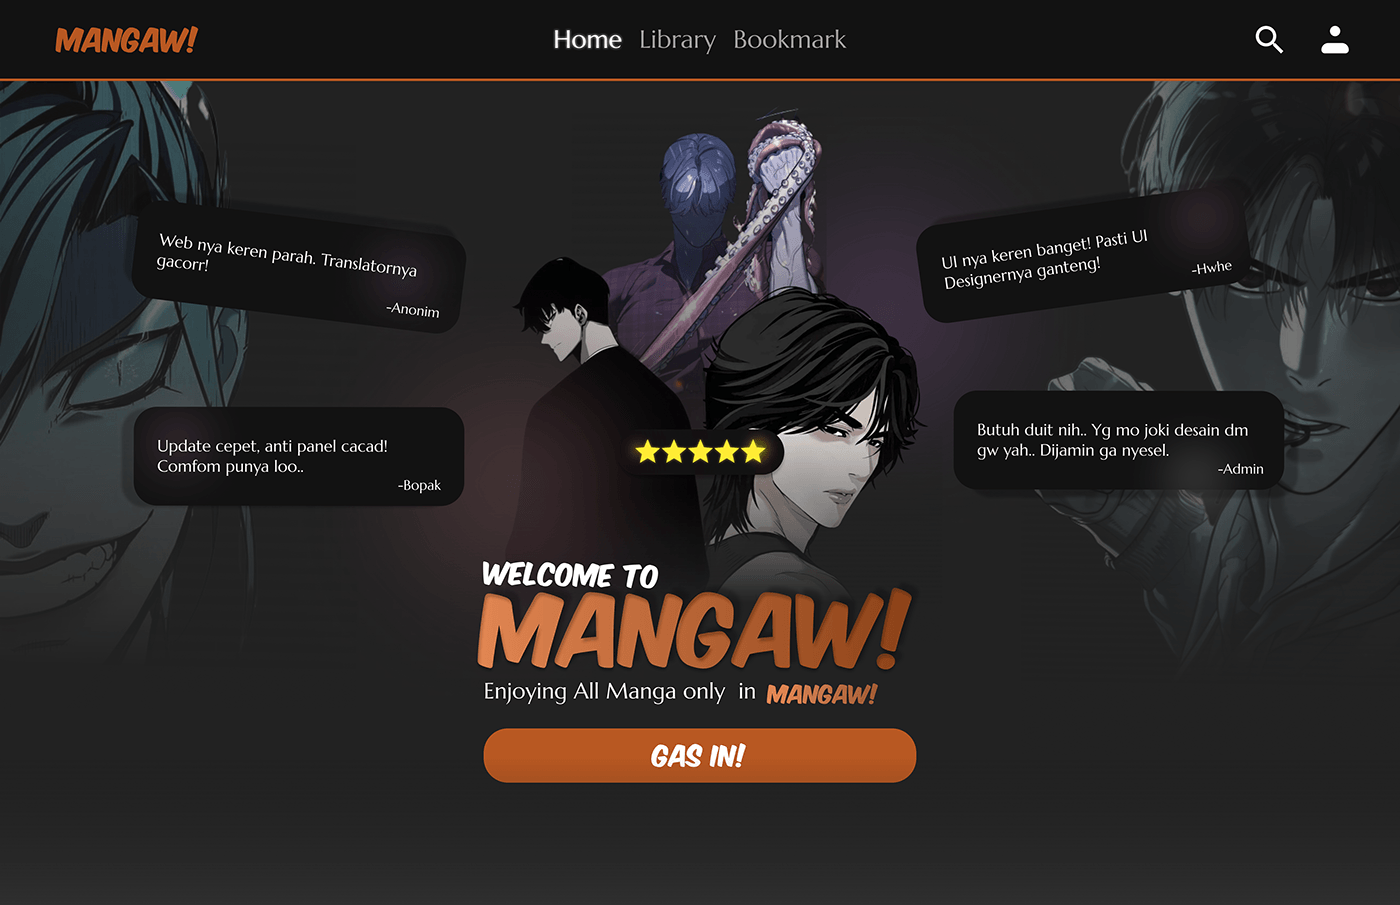 Home Page of MangAw!